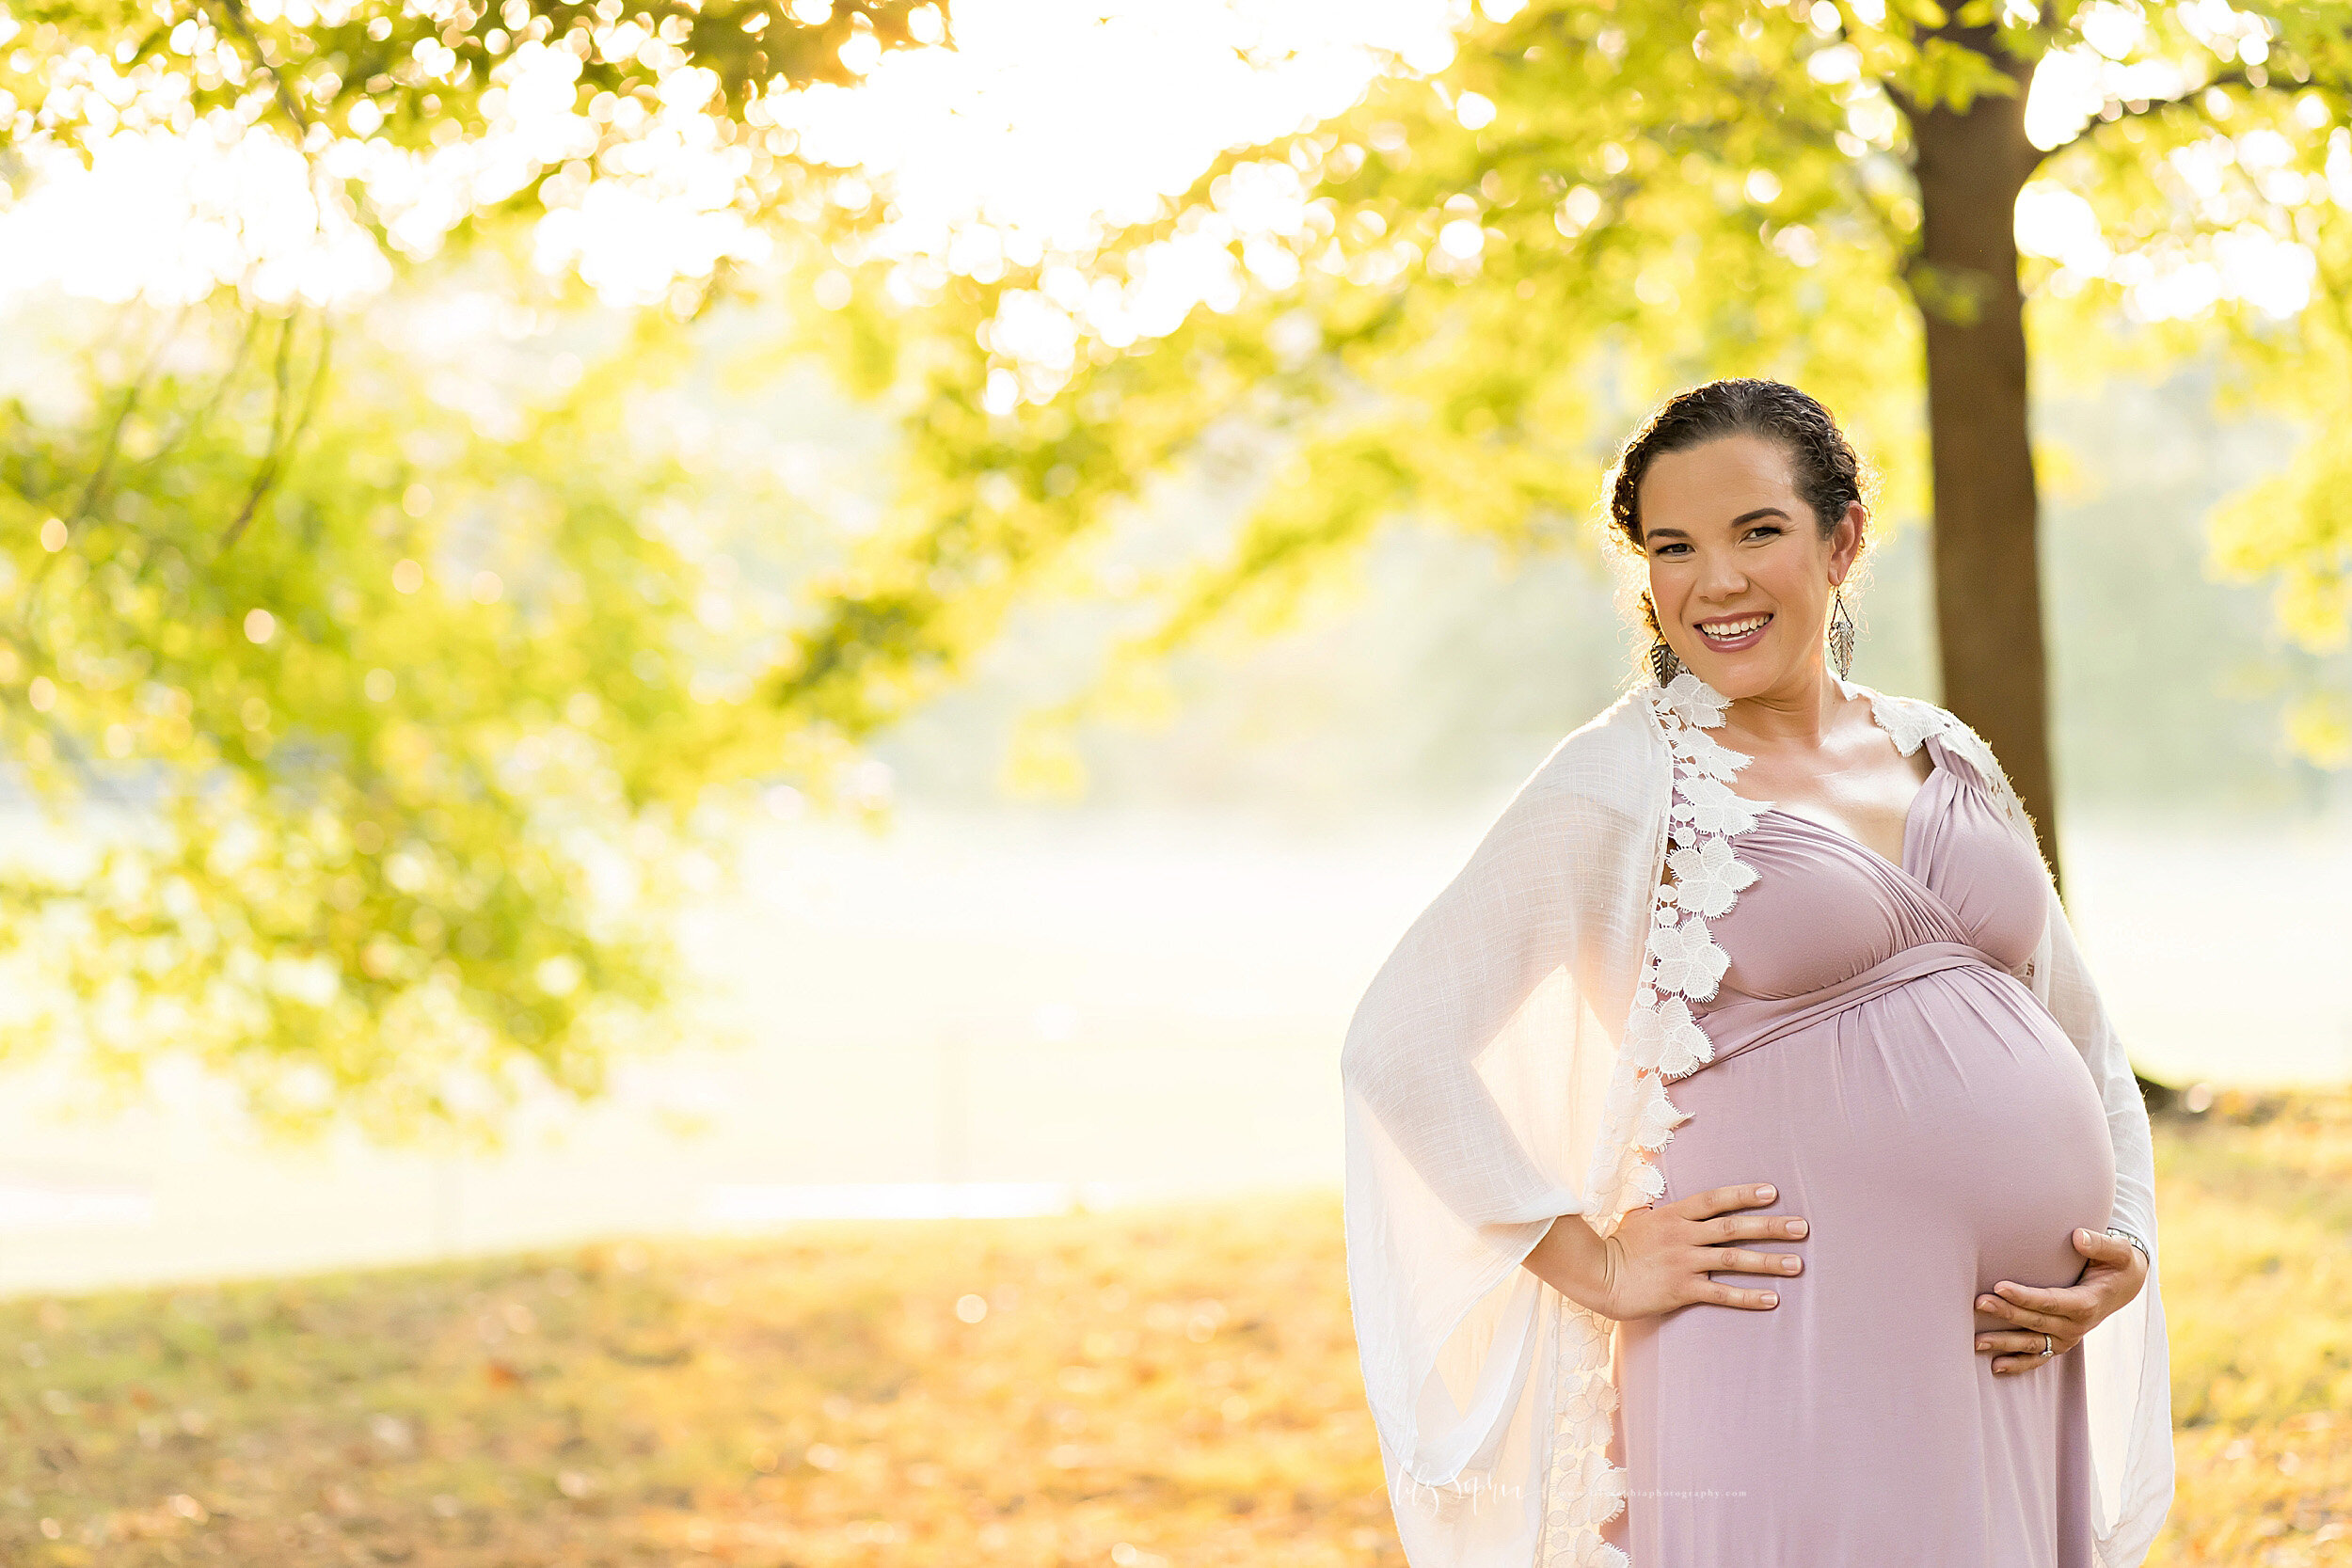 atlanta-decatur-old-fourth-ward-poncey-highlands-candler-park-grant-park-brookhaven-buckhead-virginia-highlands-west-end-decatur-lily-sophia-photography-family-maternity-park-session_2413.jpg